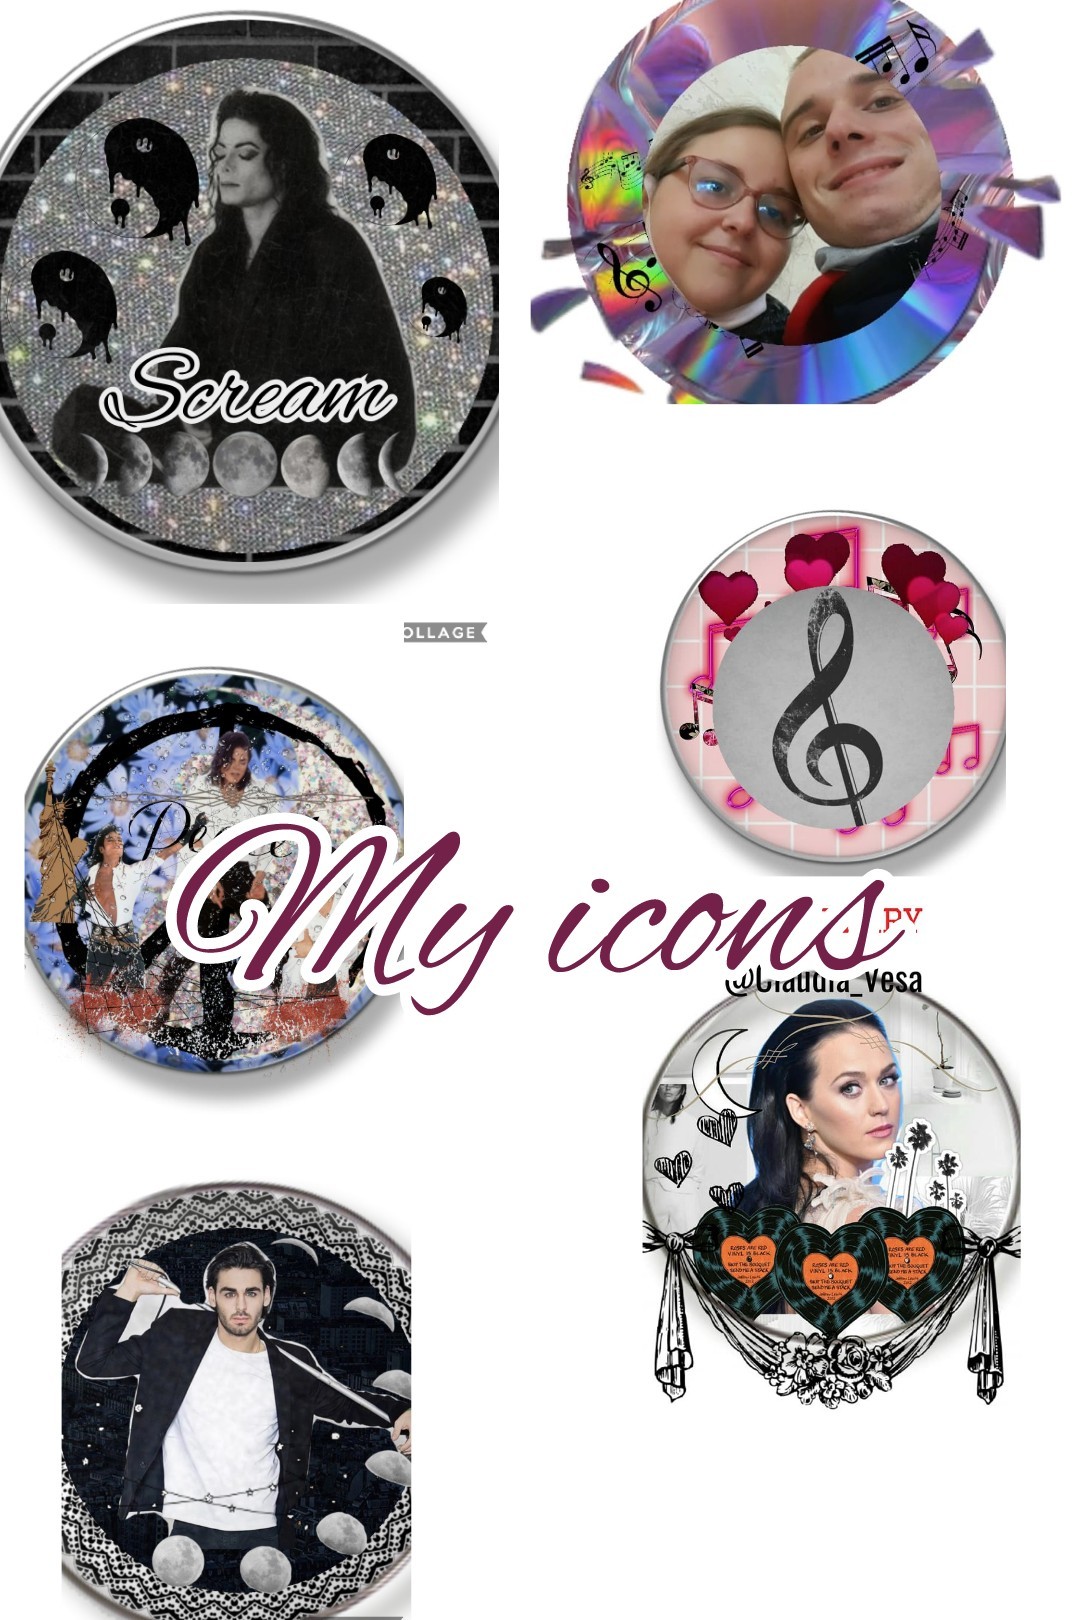 Tap
My icons ( I hope you like it)